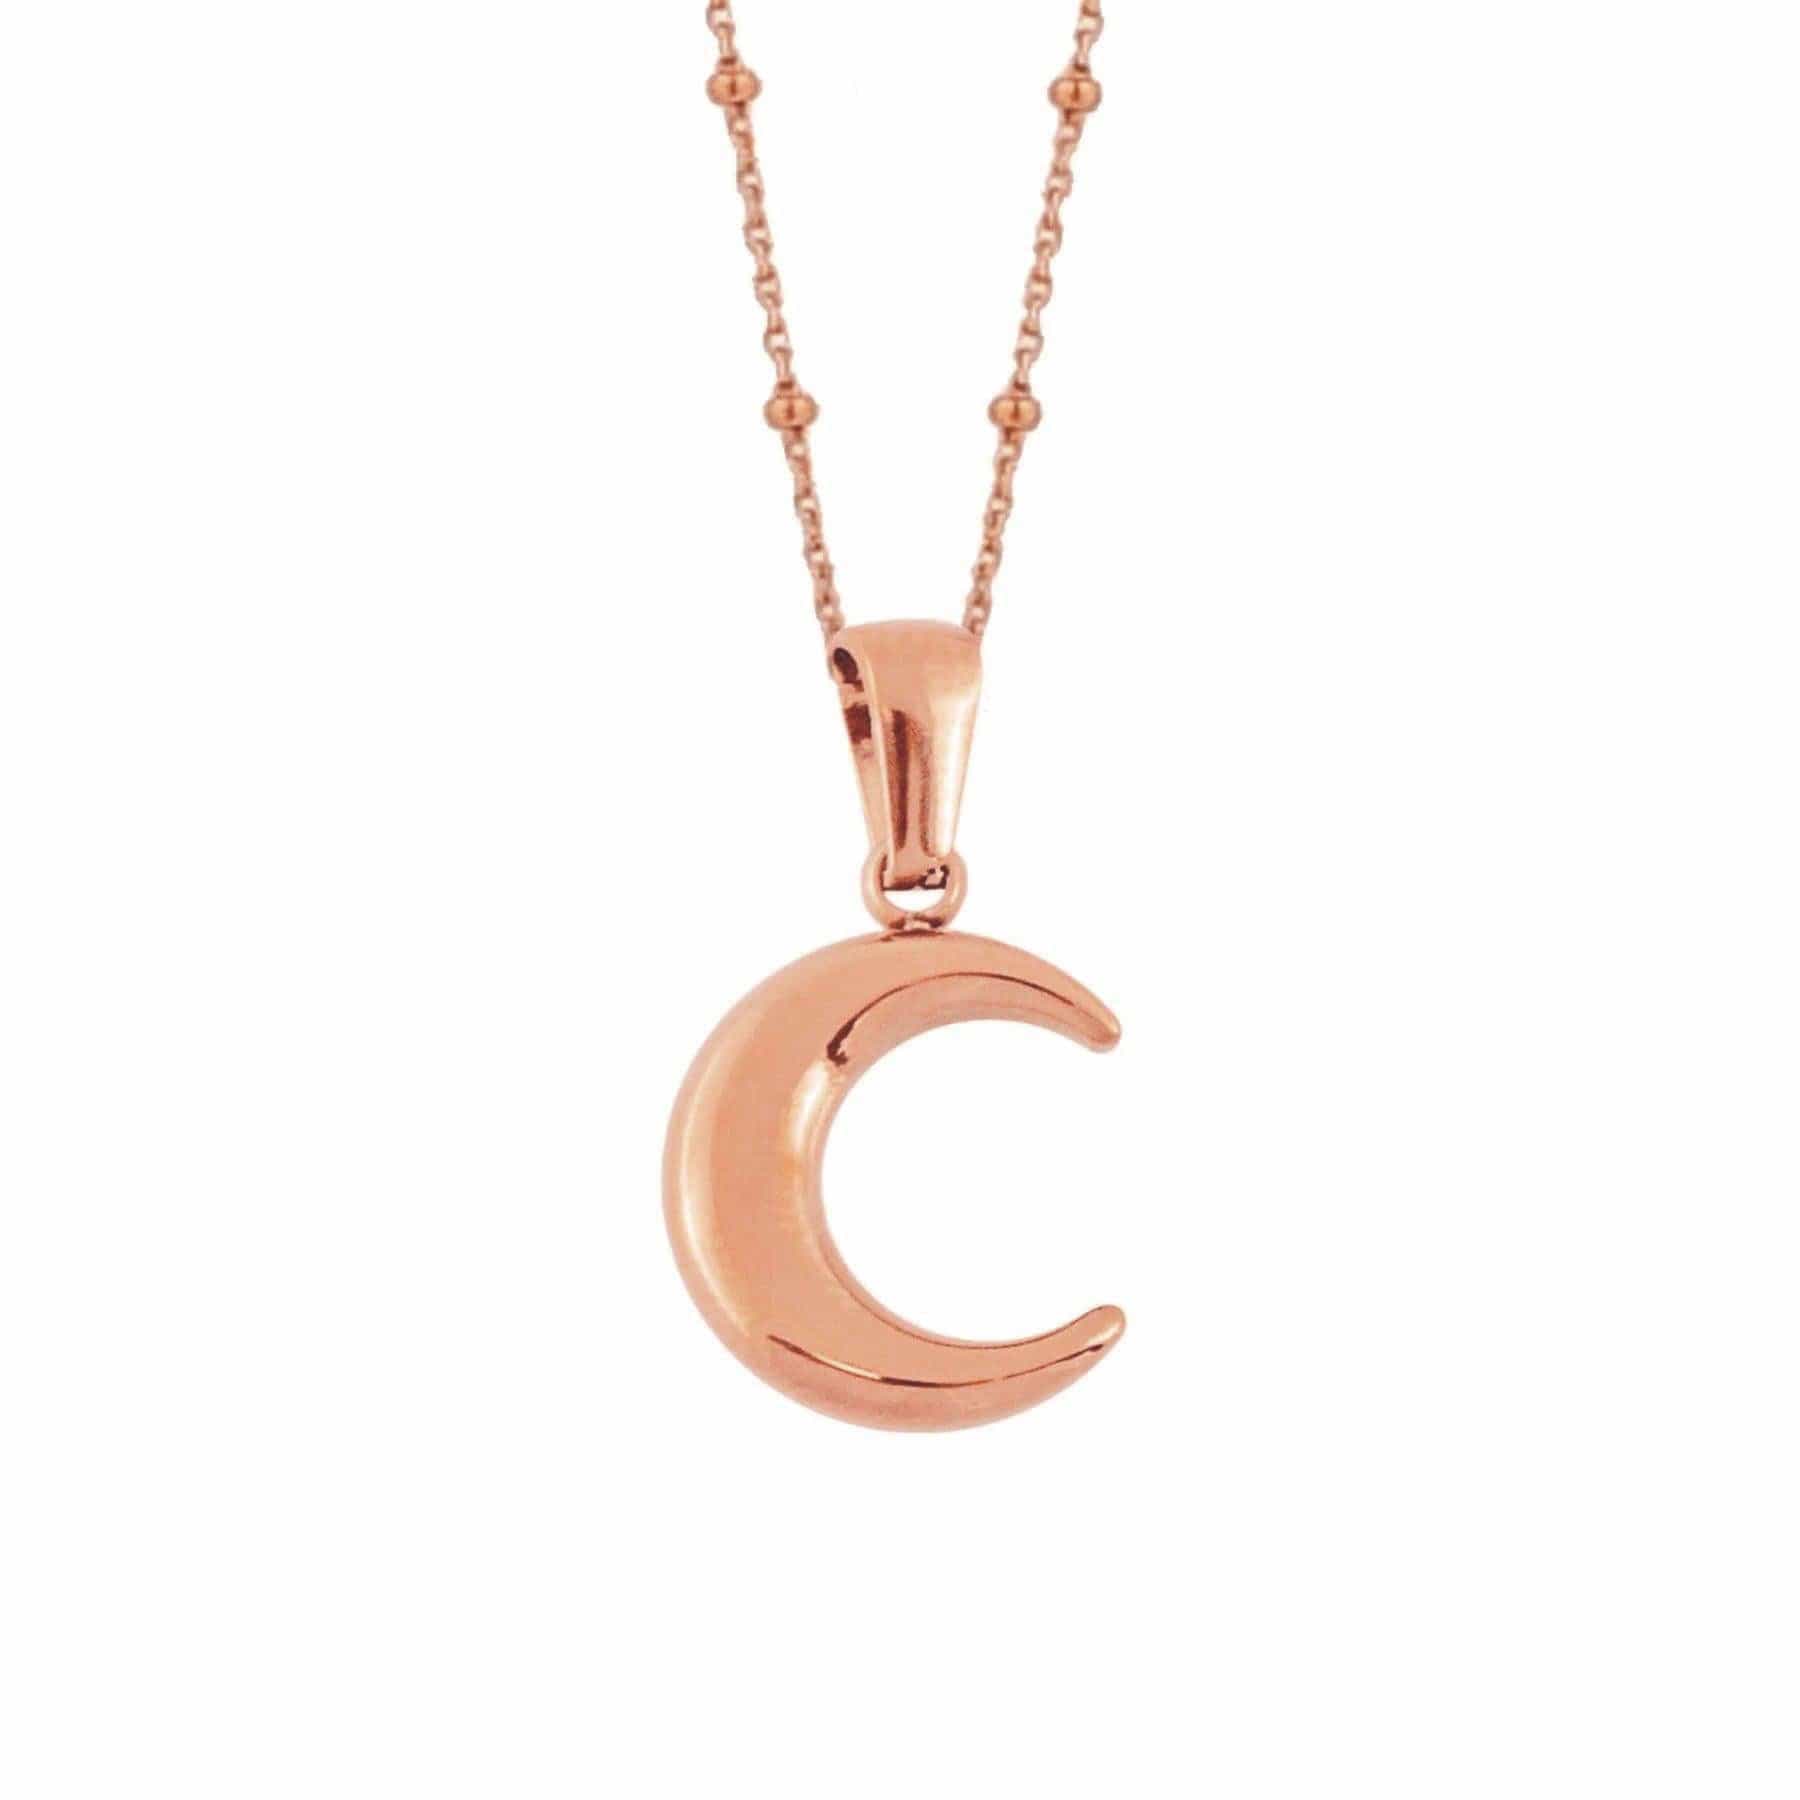 BOHOMOON Stainless Steel Moonlight Necklace Rose Gold